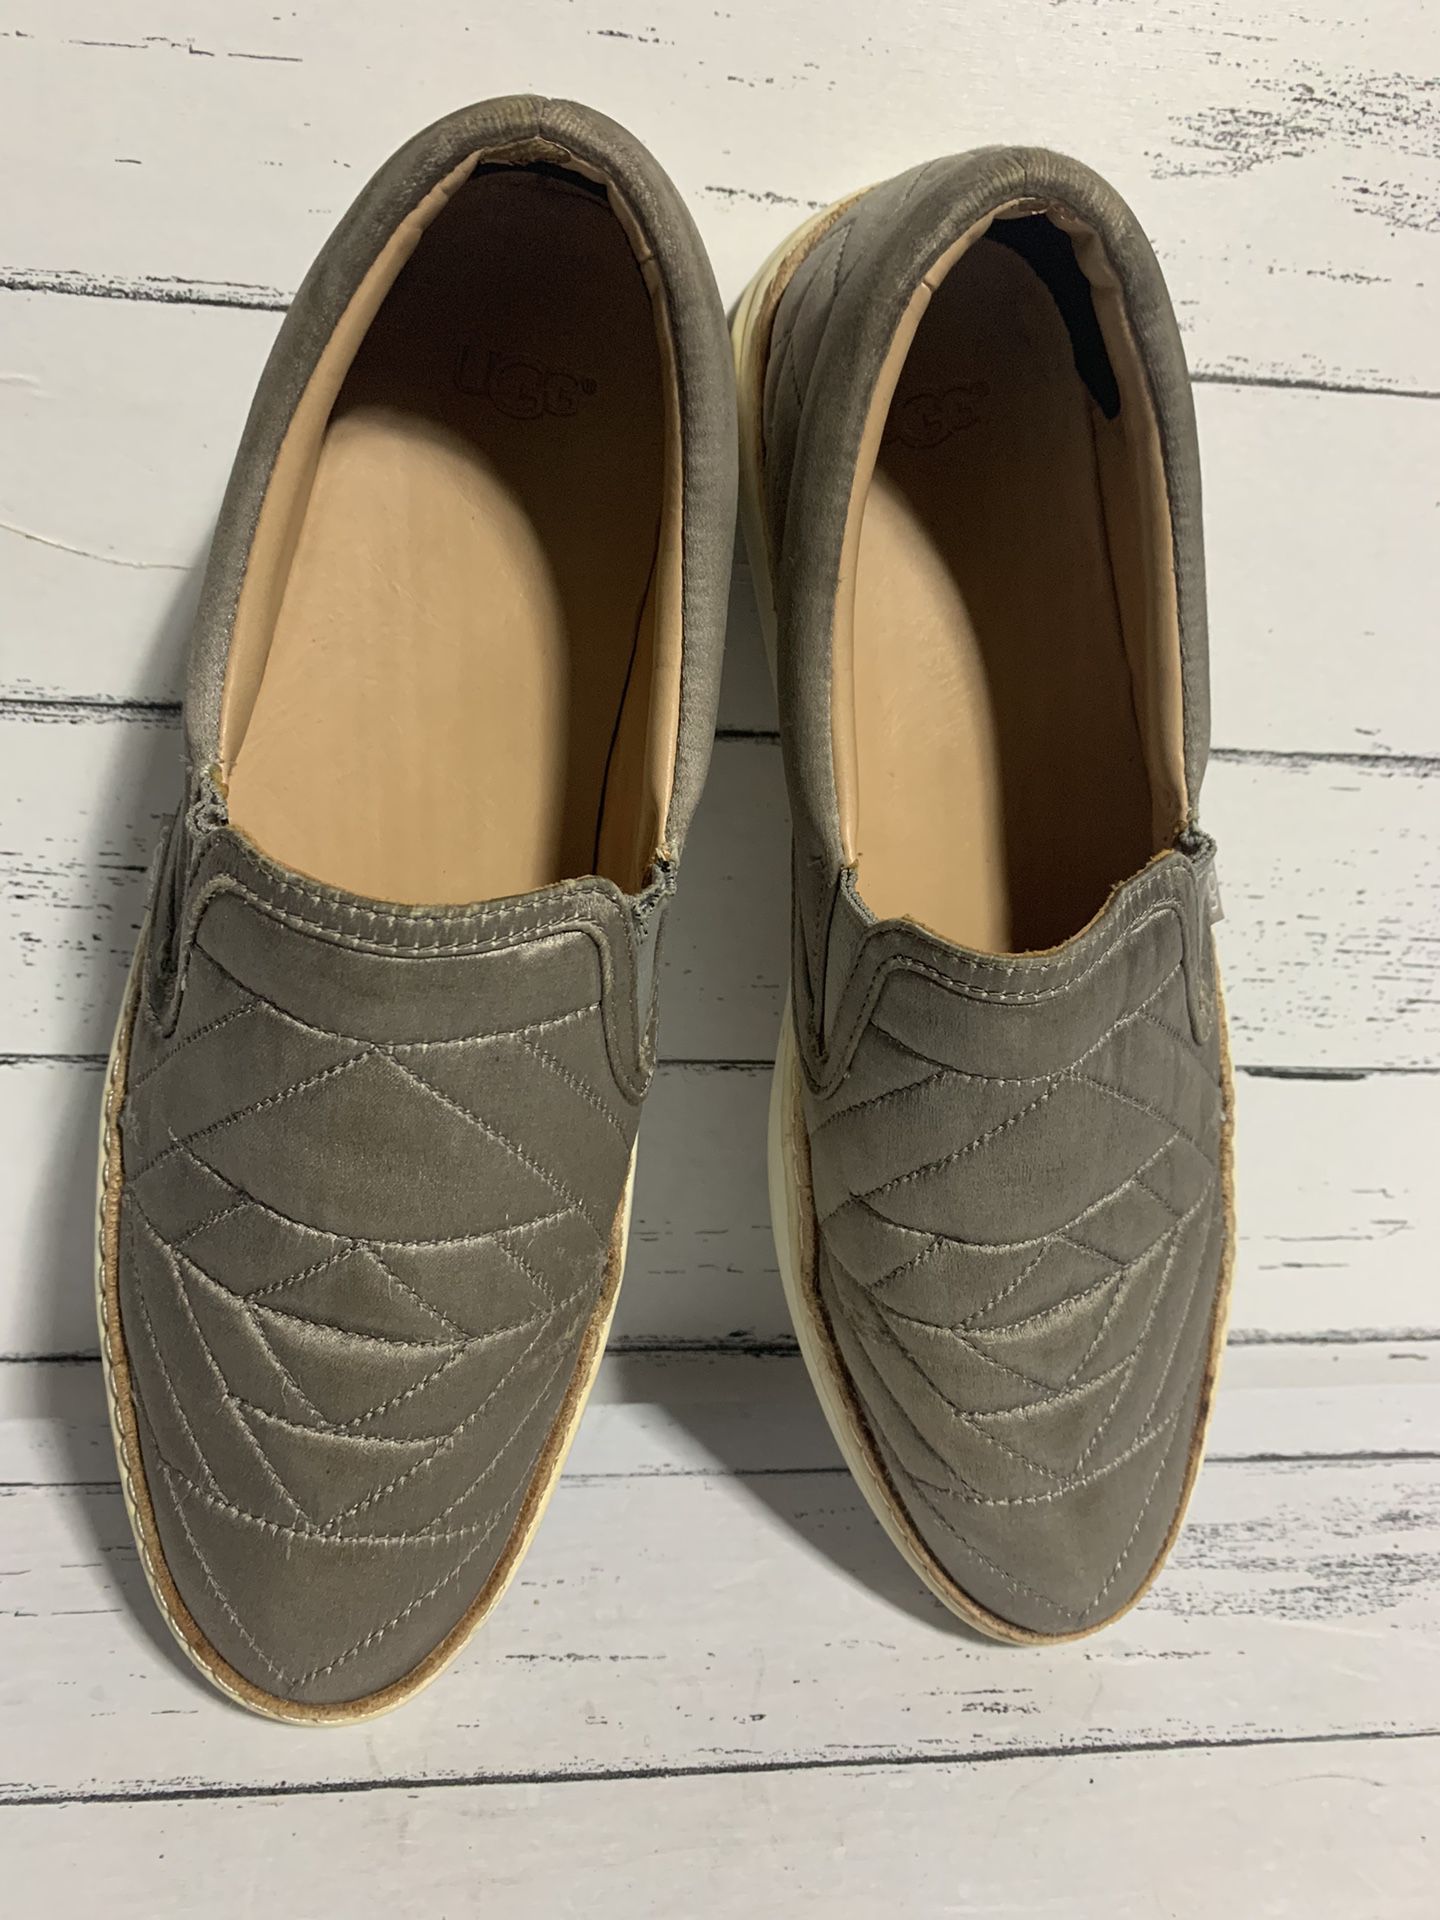 UGG women shoes size 8.5 slip-ons